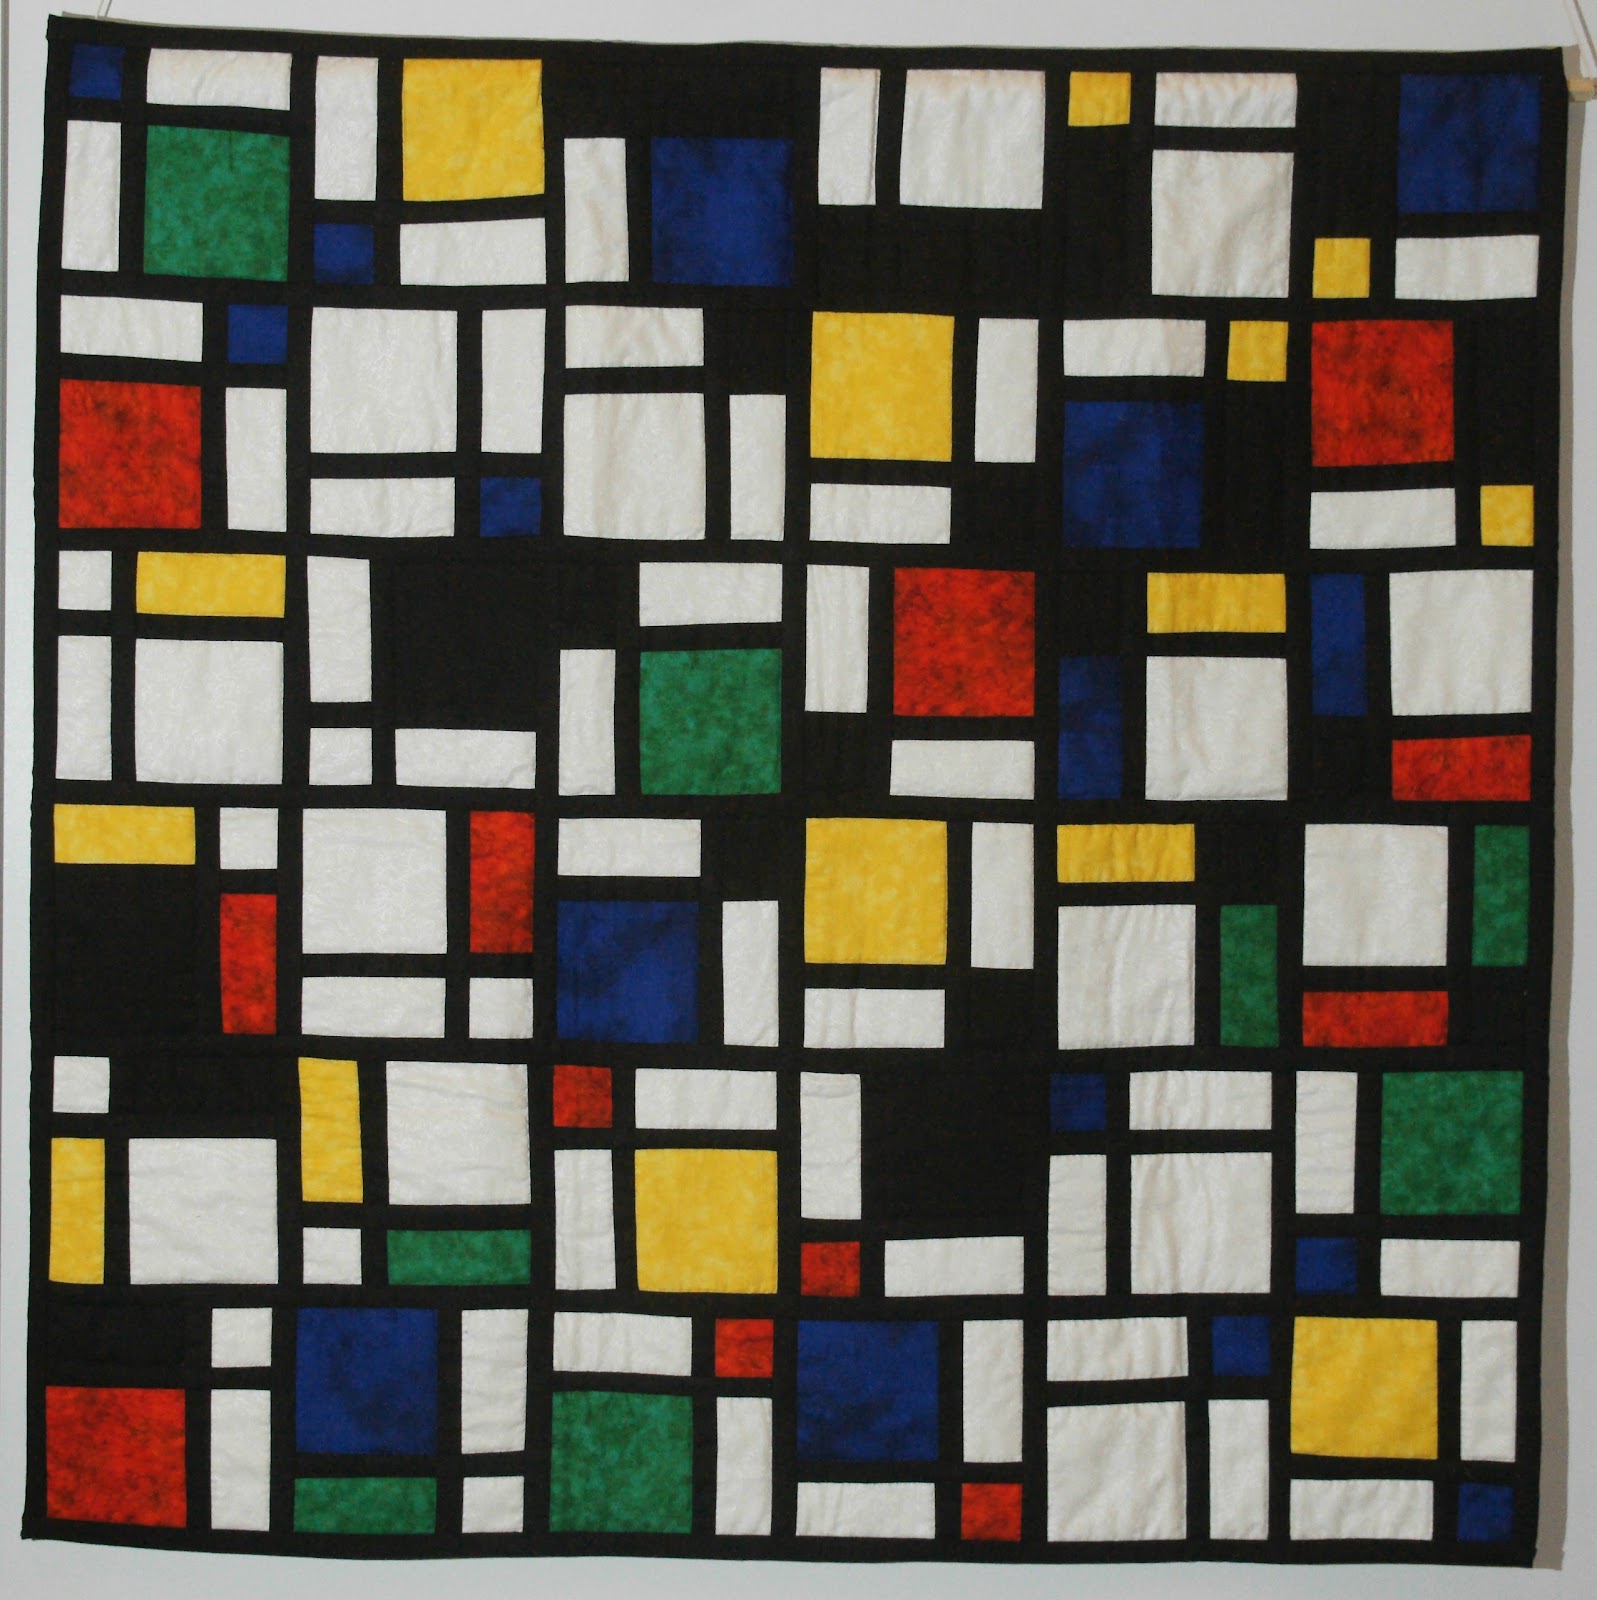 Fine arts: Piet Mondrian's abstraction and his trees